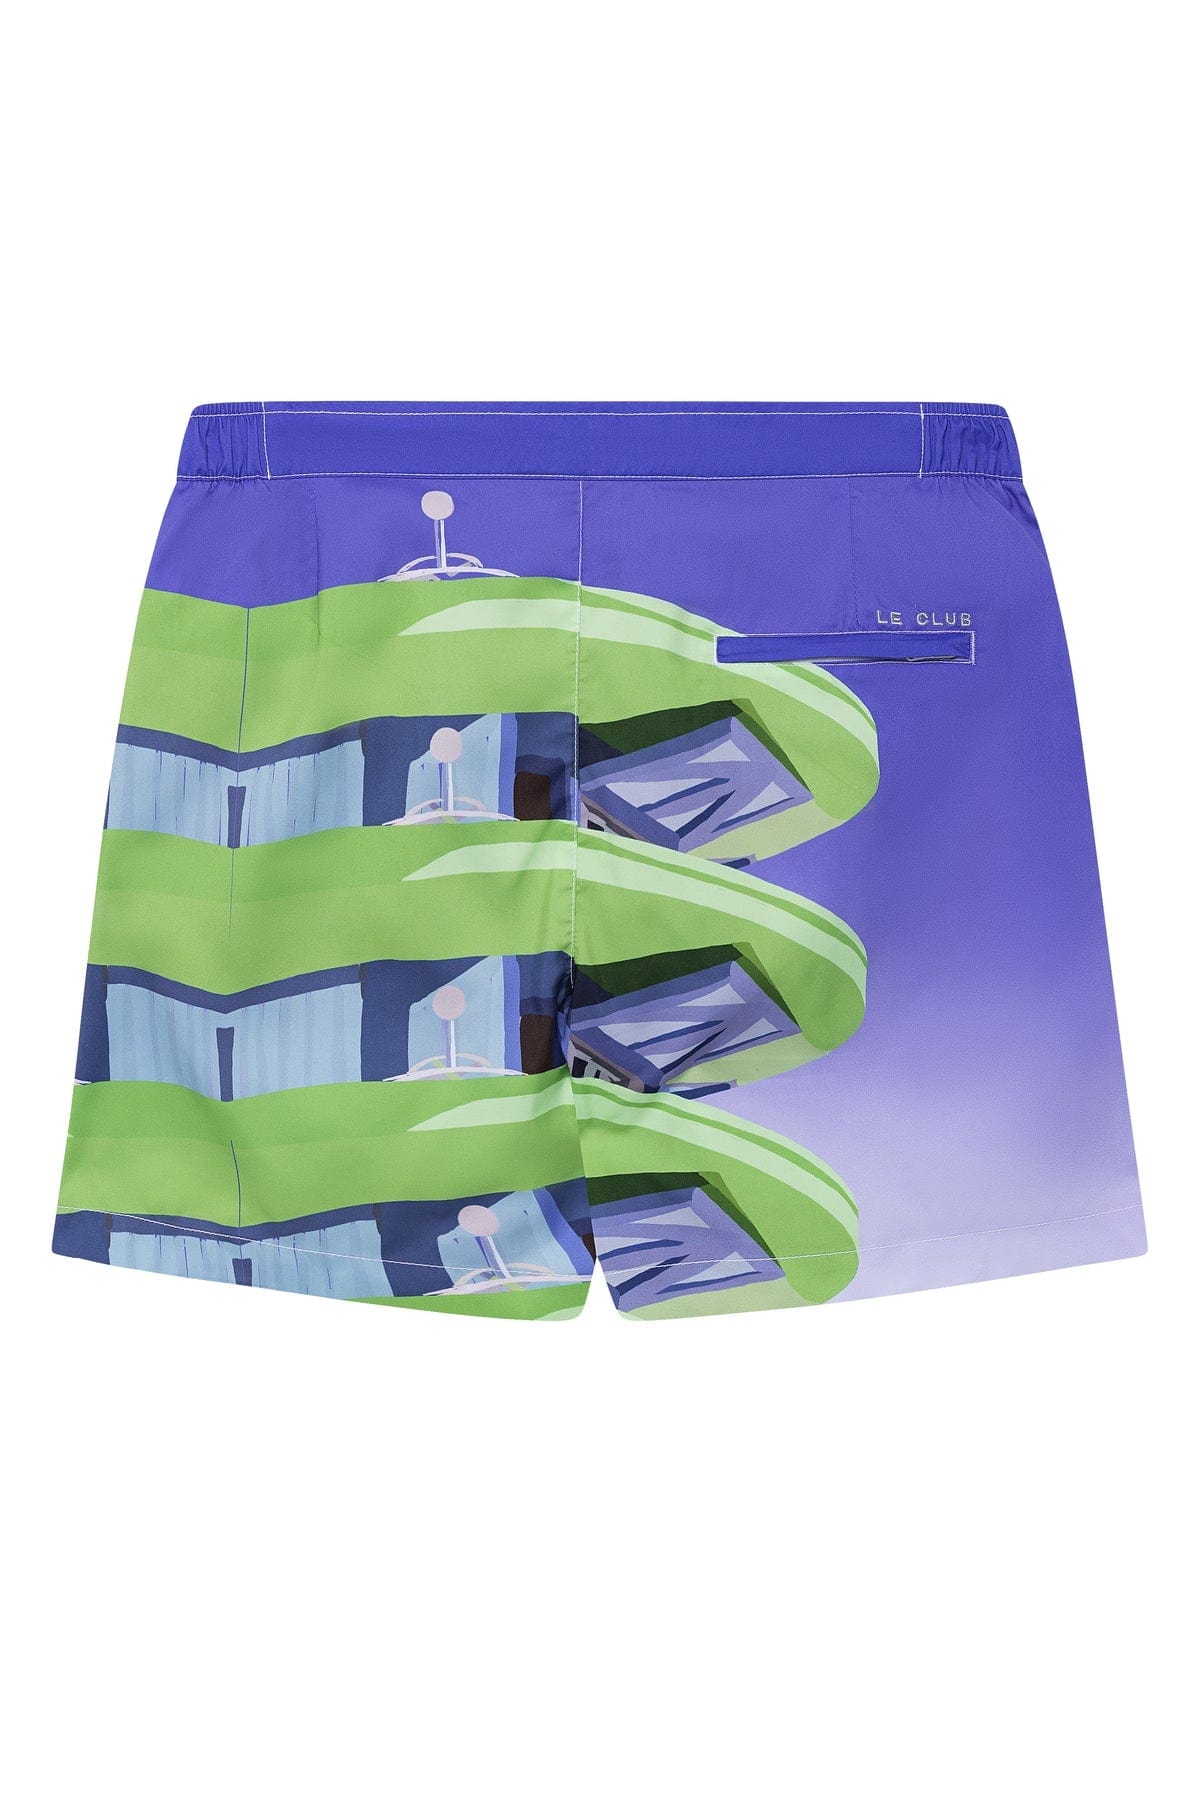 Load image into Gallery viewer, Le Club Apparel &amp;amp; Accessories &amp;gt; Clothing &amp;gt; Shorts Club Men&amp;#39;s Swim Trunk Miami Beach Tower 5 2022 Le Club Men&amp;#39;s Swim Trunk Miami Beach Tower 5
